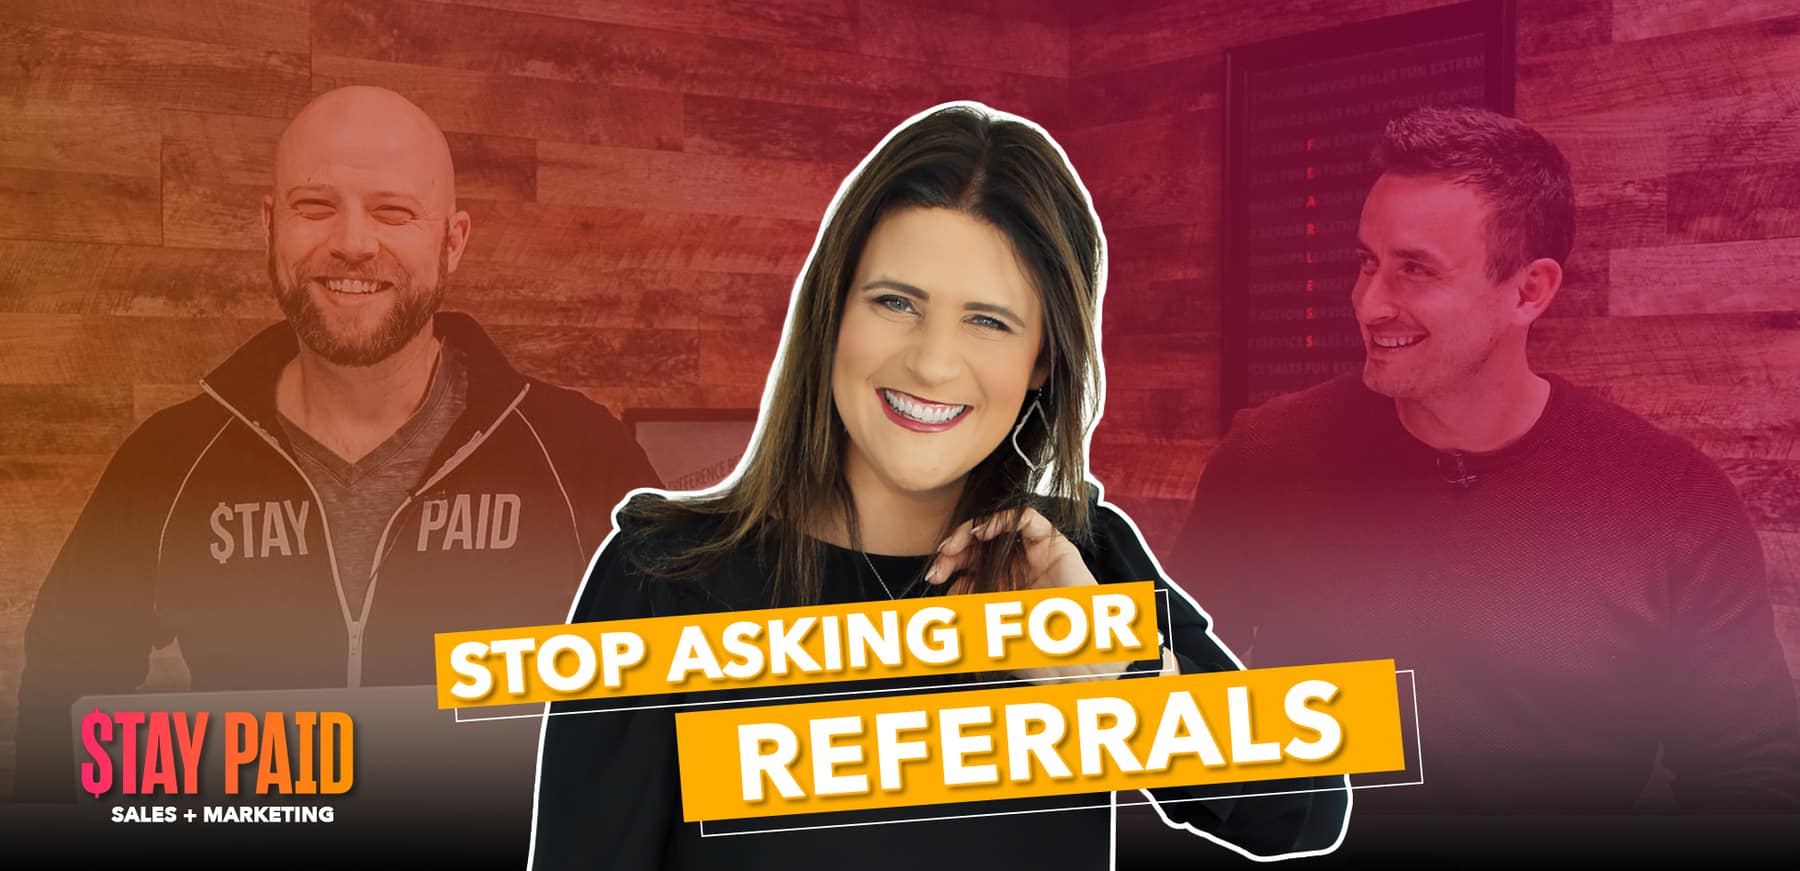 Stop Asking for Referrals